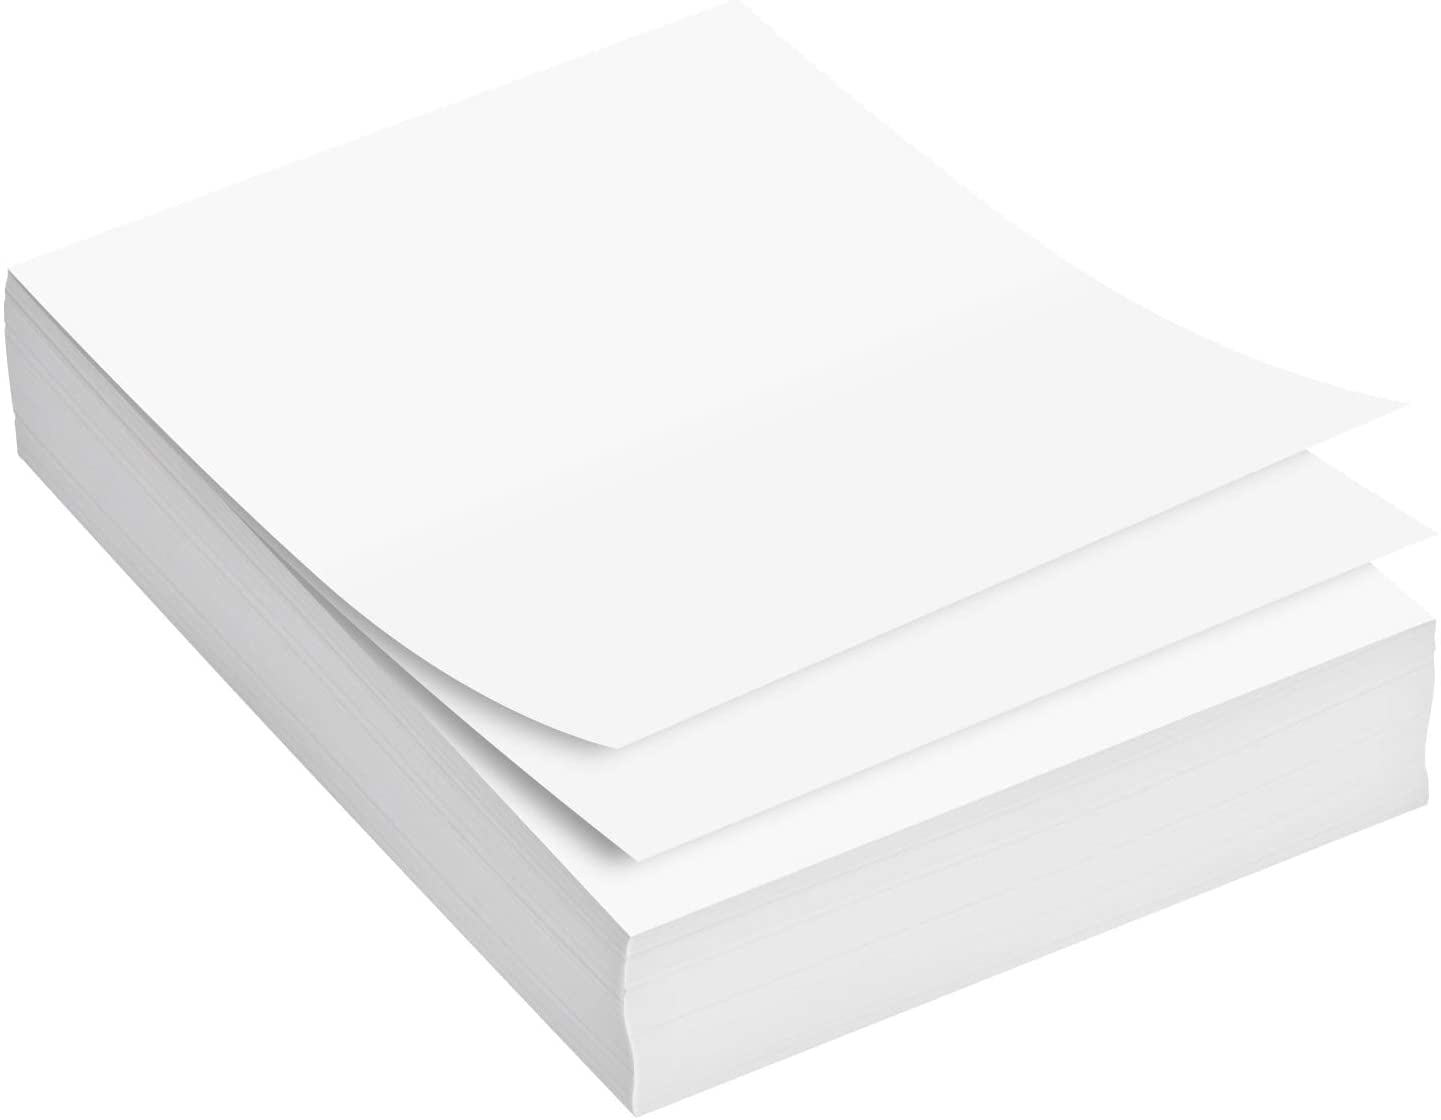 Everyday Multifunction Copier A4 Plain Printing Paper White 80gsm 